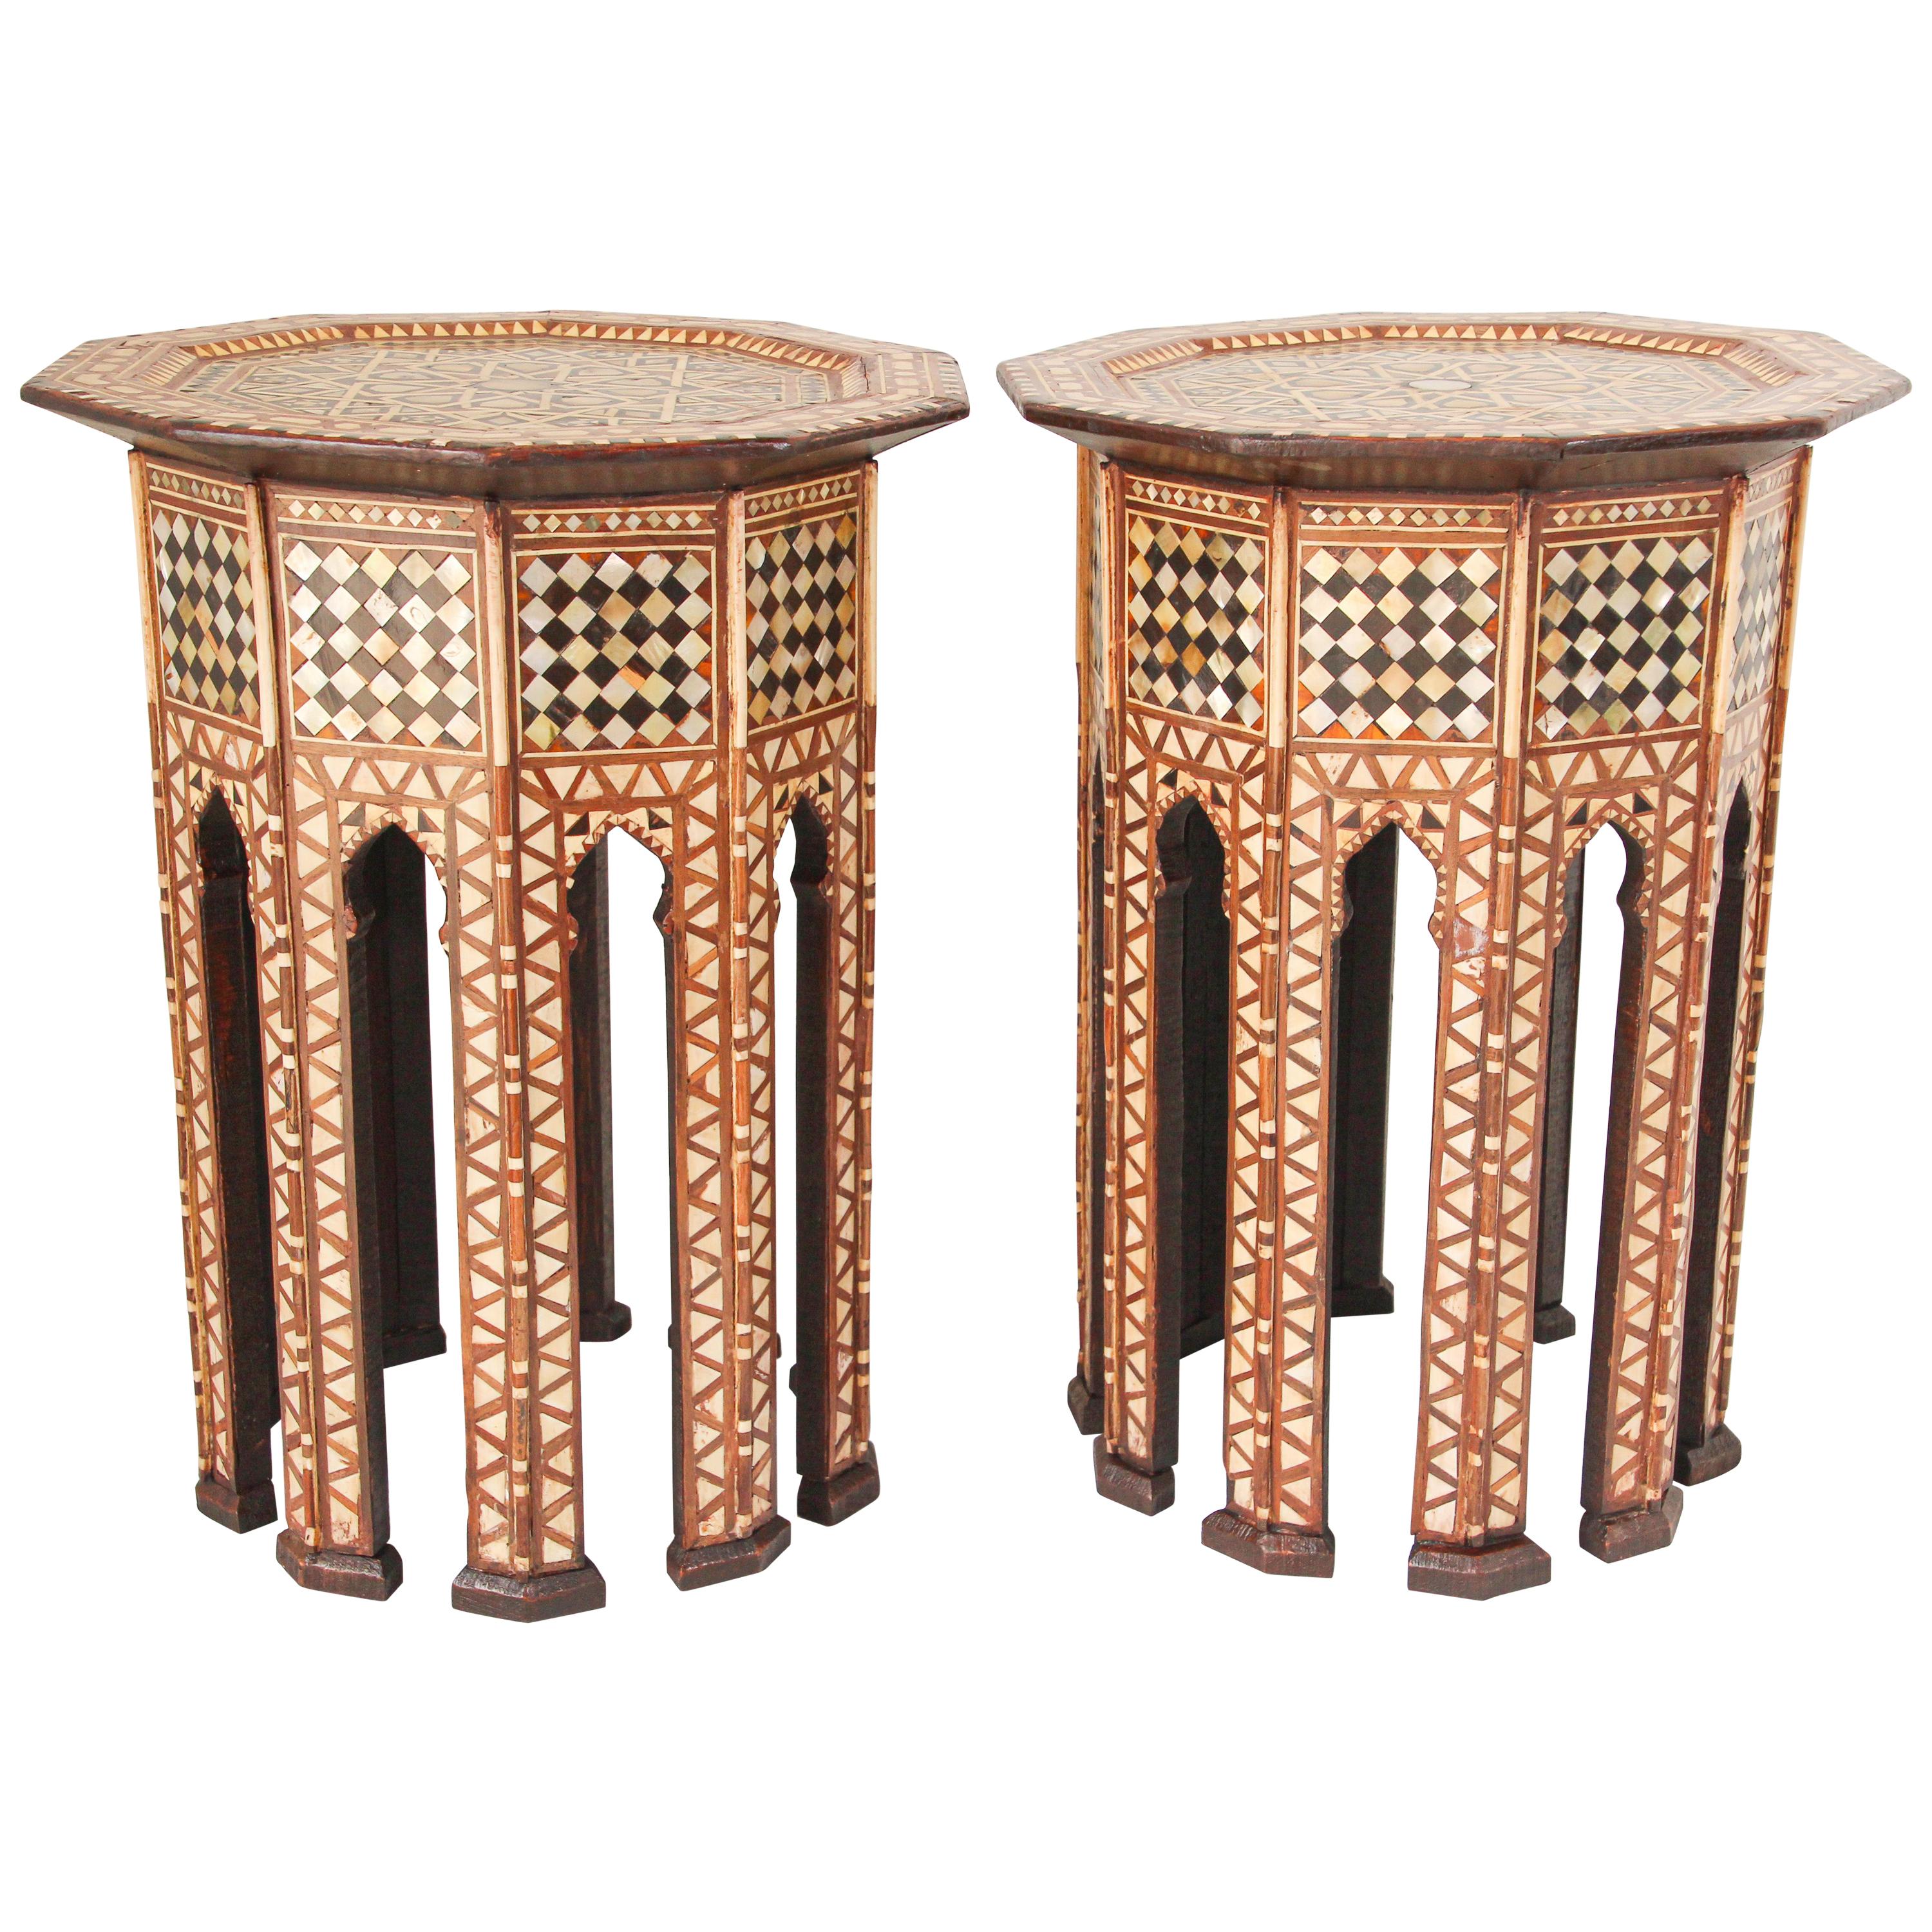 Turkish ottoman Moorish style walnut octagonal side tables inlaid with mosaic marquetry.
Middle Eastern Arabian Micro Mosaic side tables with Moorish arches on the eight sides,
Levantine pedestal tables finely inlaid and handcrafted by skilled